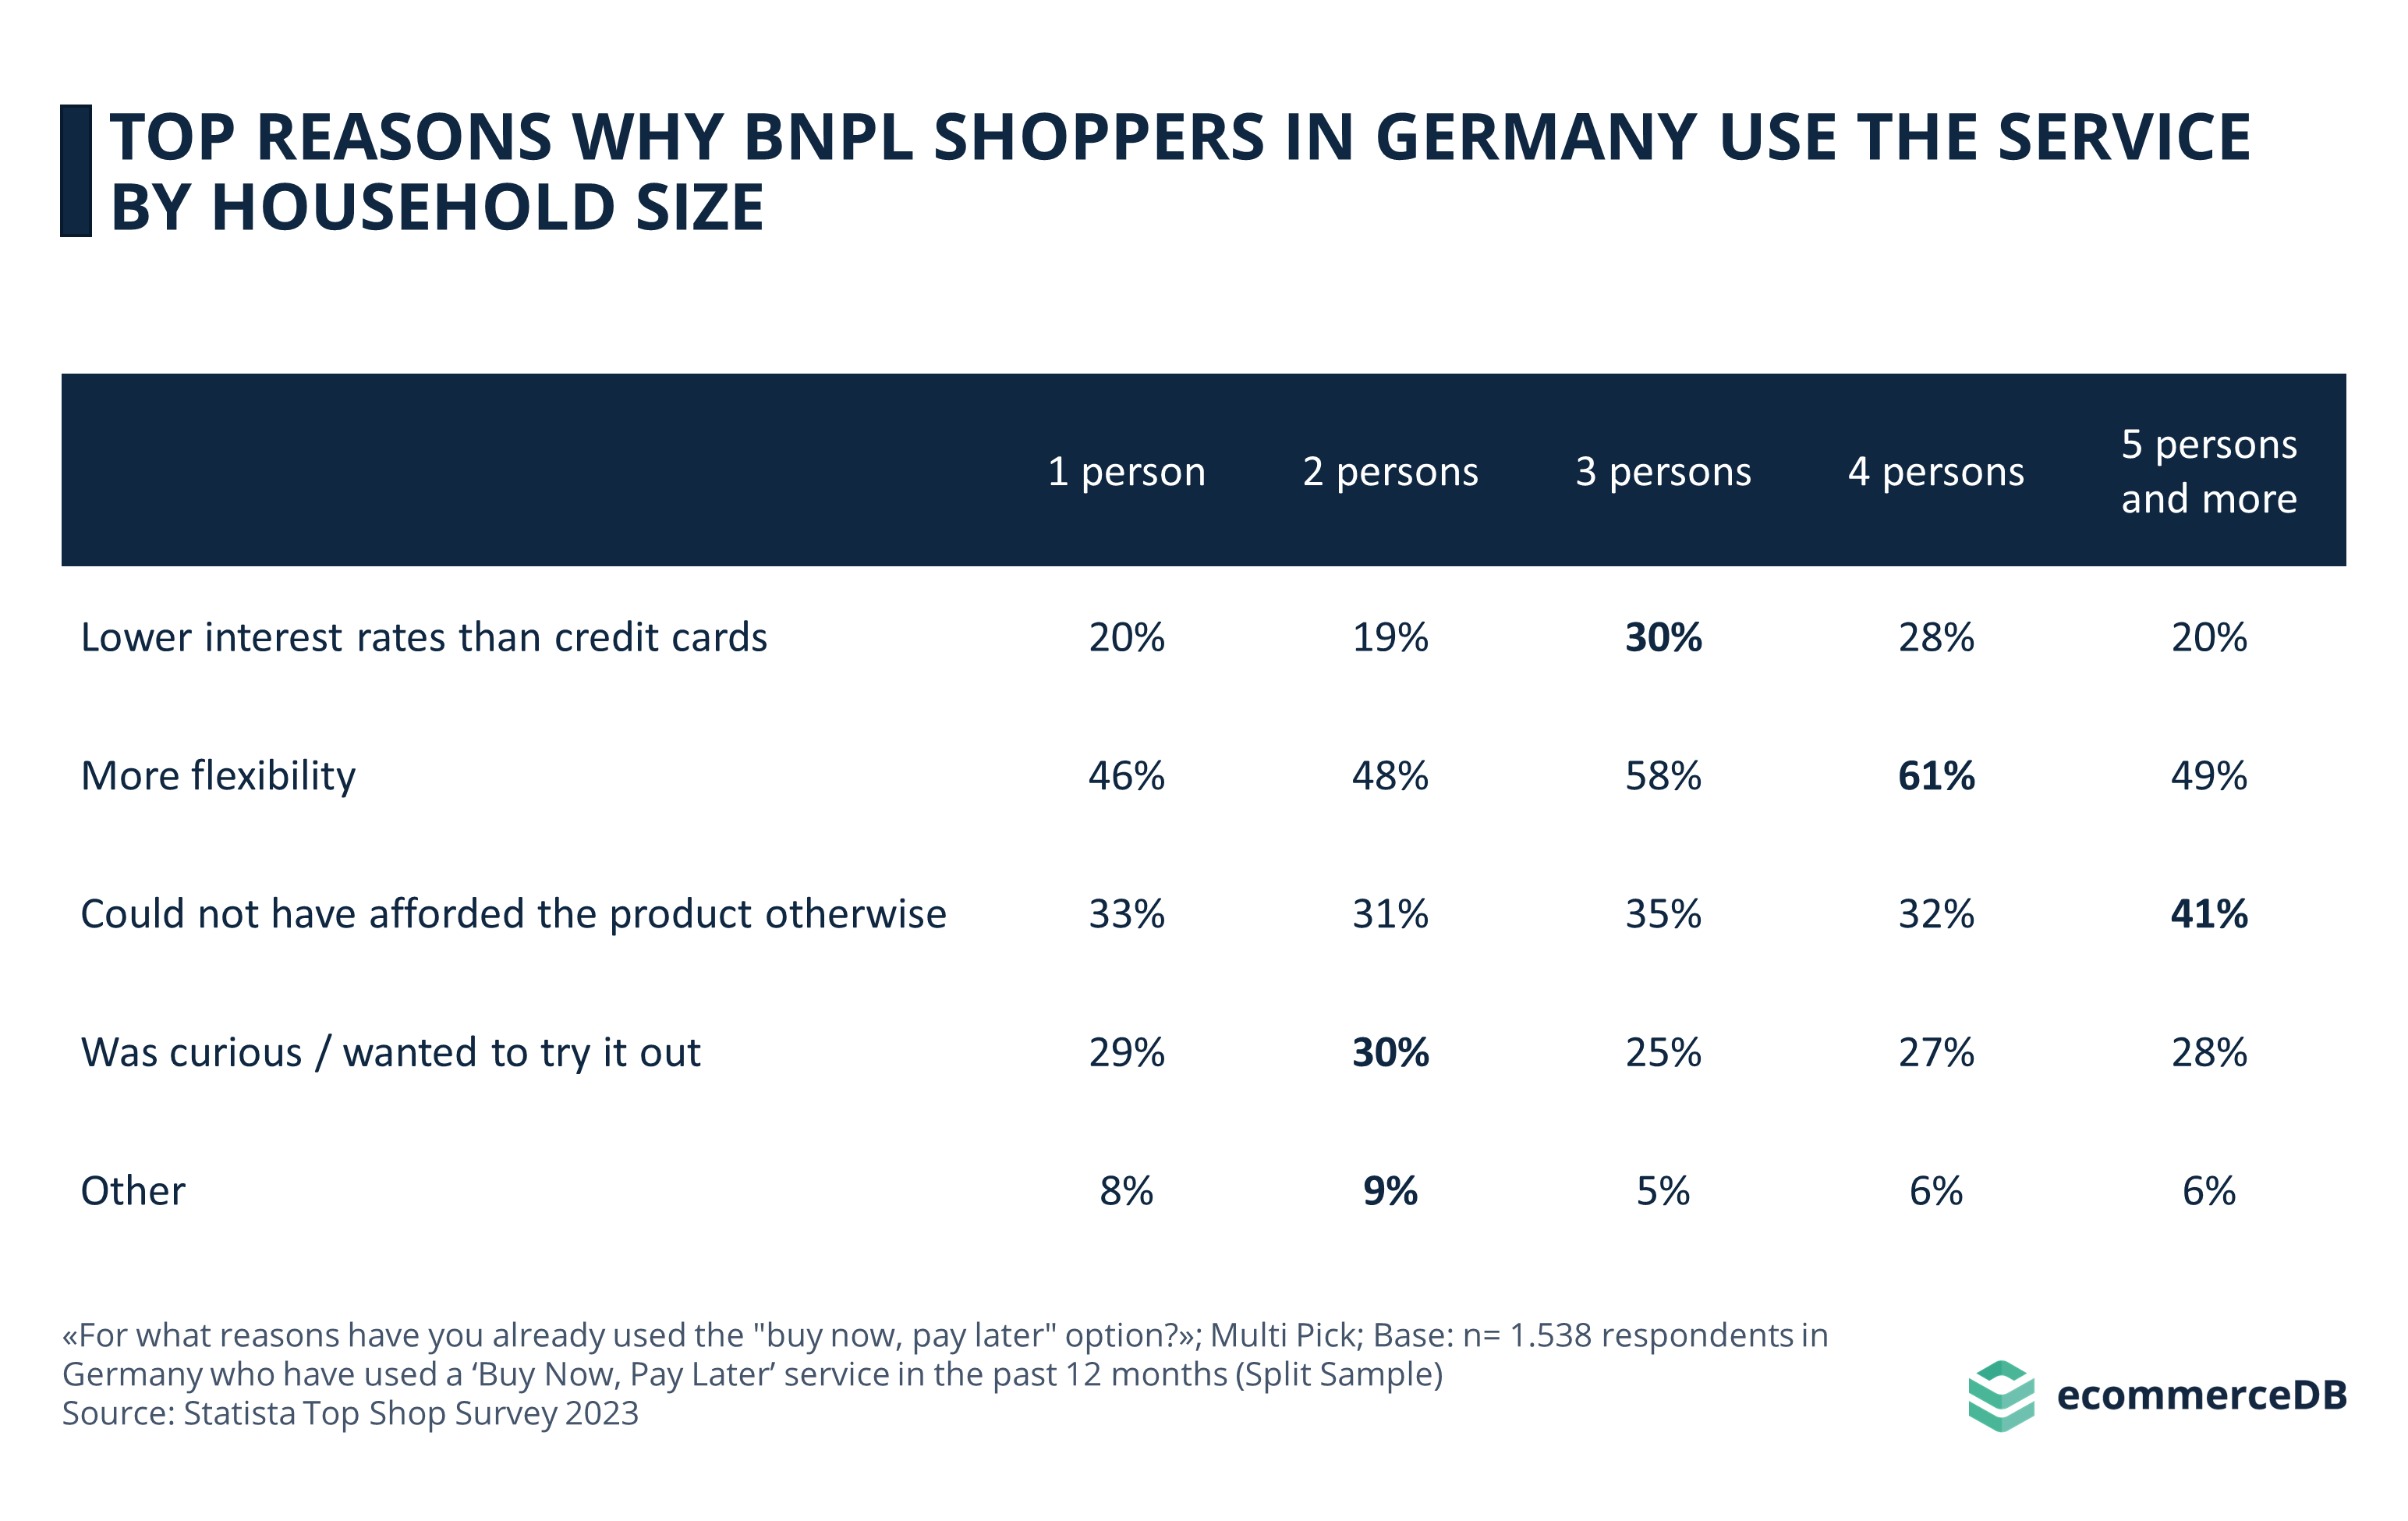 TOP REASONS WHY BNPL SHOPPERS IN GERMANY USE THE SERVICE BY HOUSEHOLD SIZE